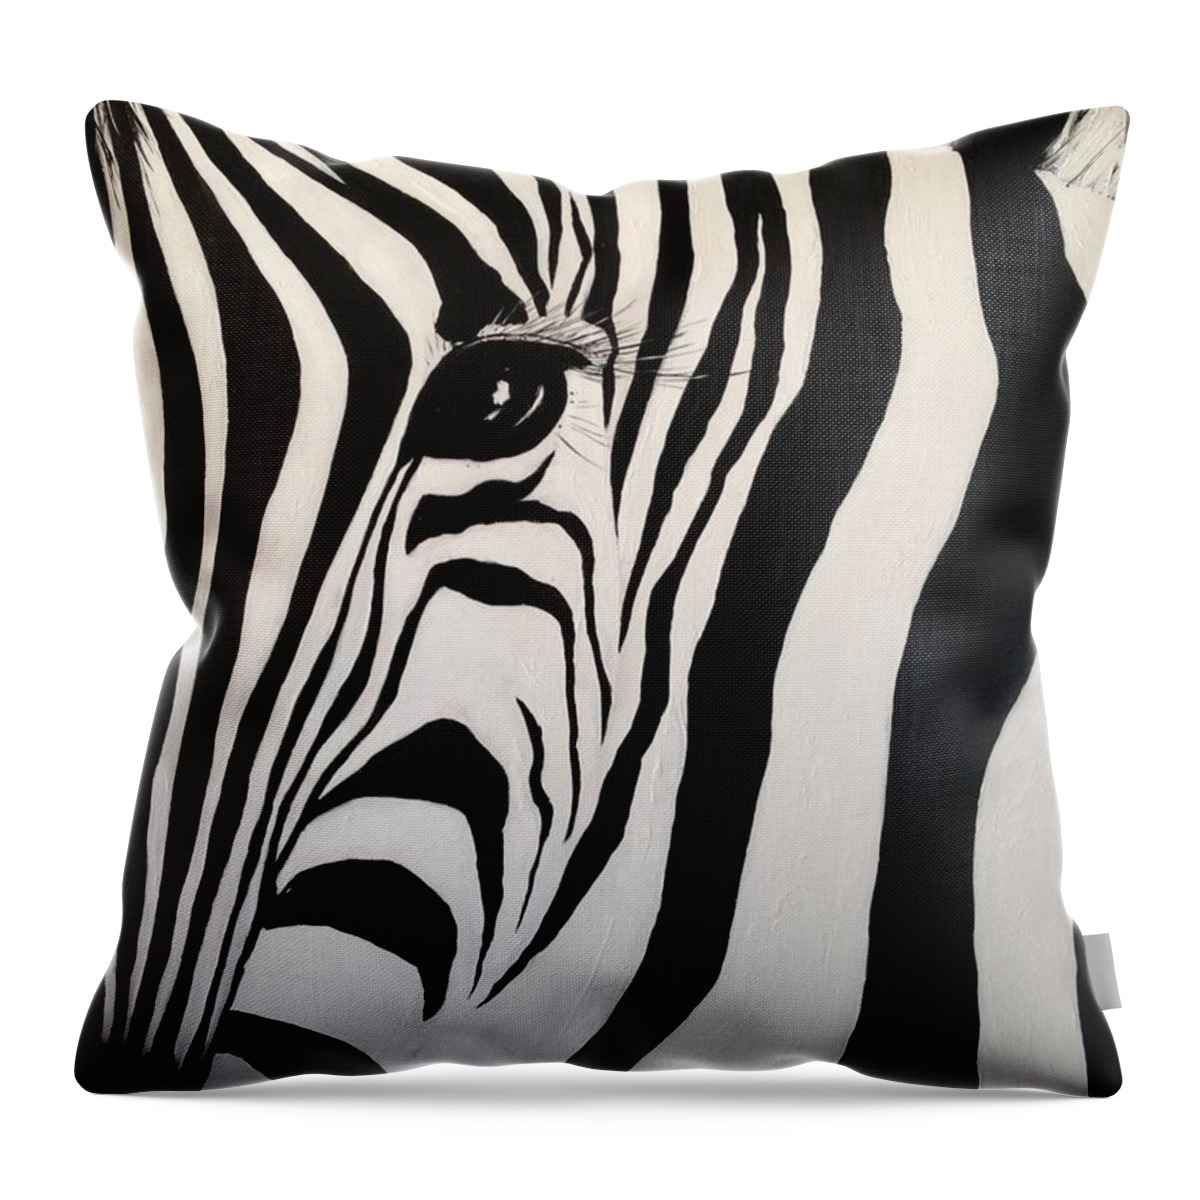 Zebra Throw Pillow featuring the painting The Zebra with One Eye by Alan Lakin